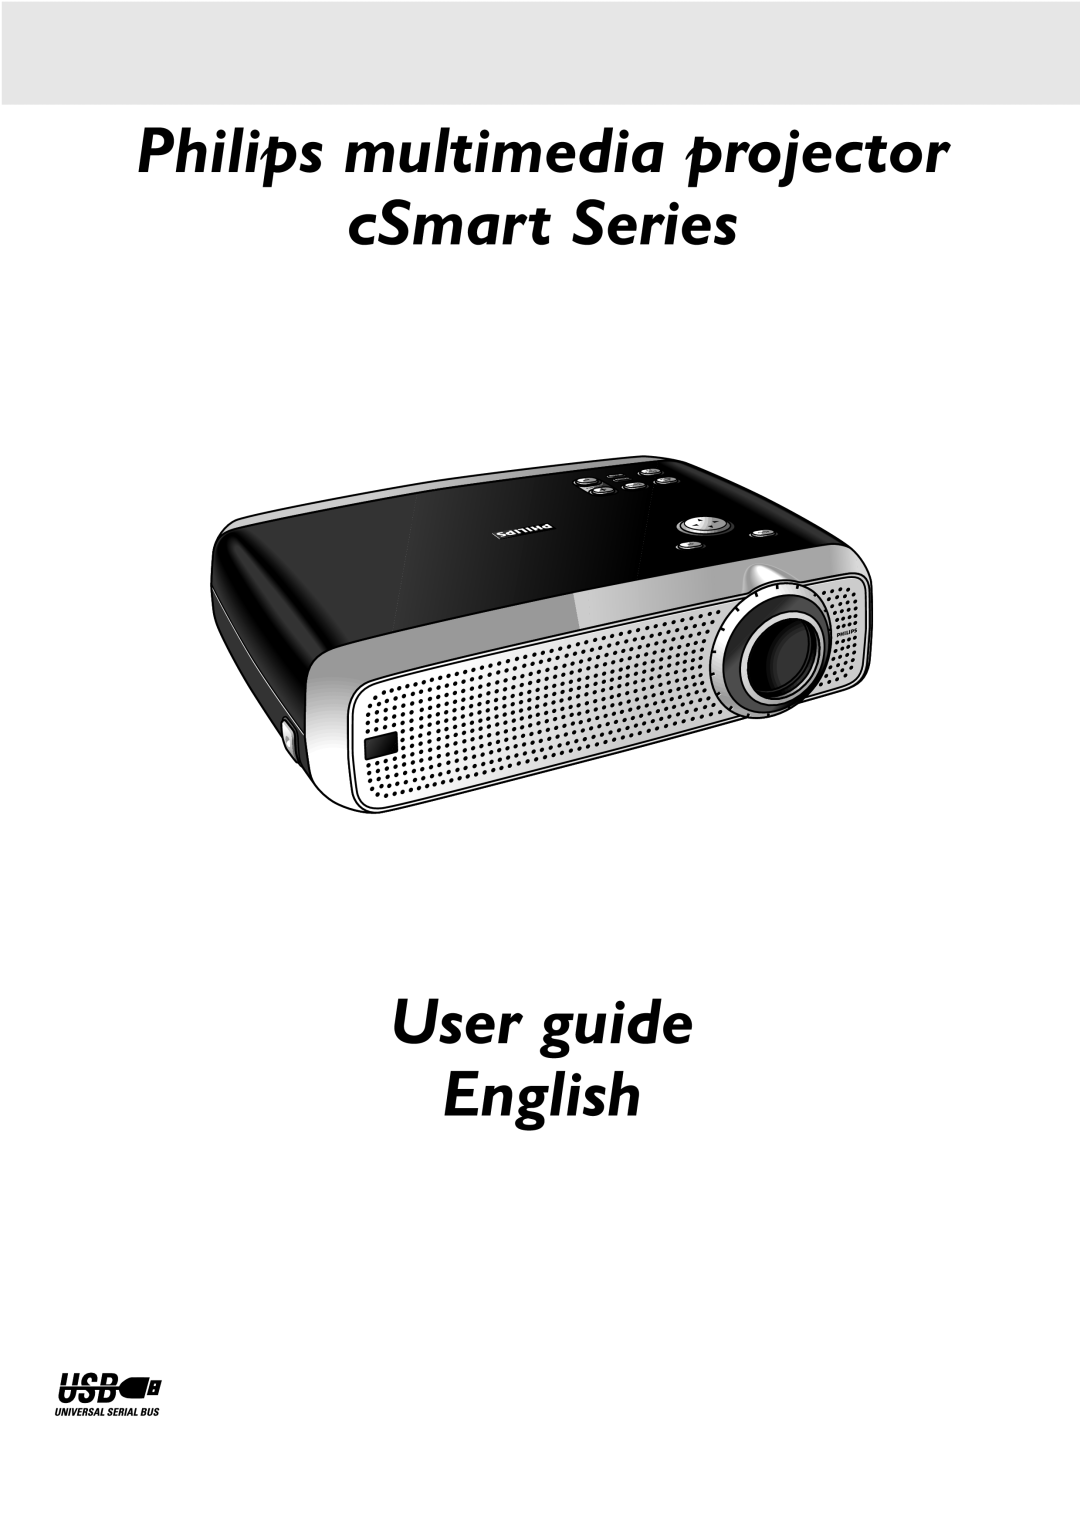 Philips manual Philips multimedia projector cSmart Series, User guide English 